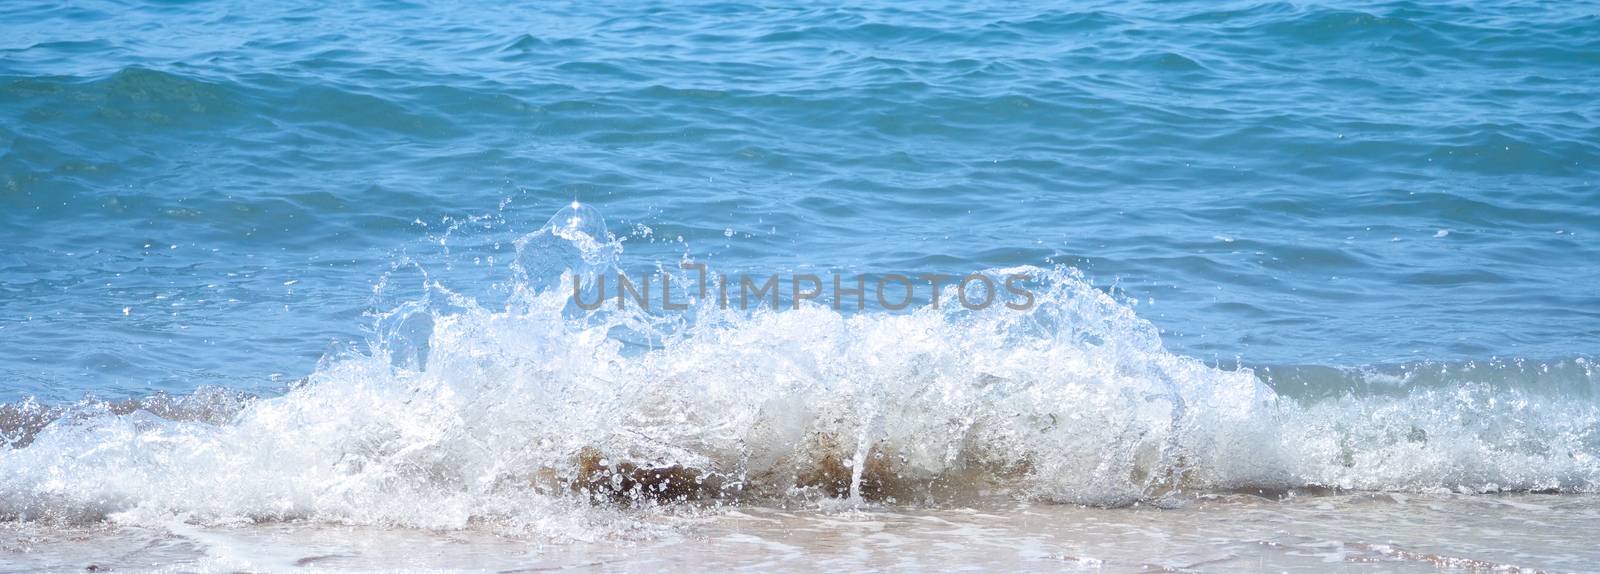 Clear light blue color sea water splashing to beach by gnepphoto